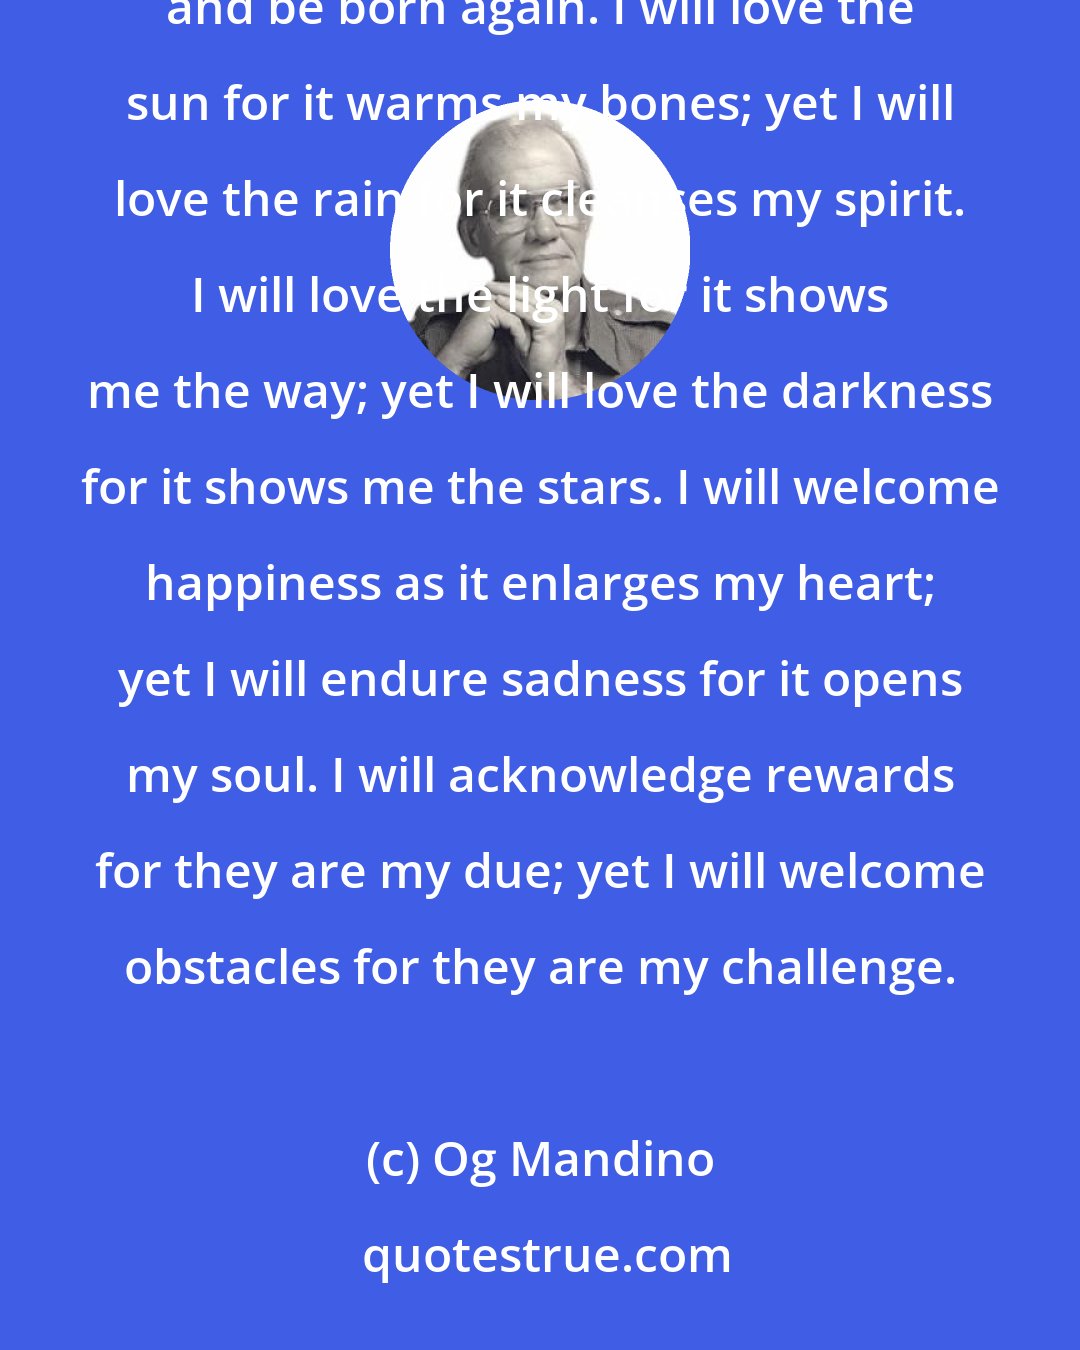 Og Mandino: I will greet this day with love in my heart. And how will I do this? Henceforth will I look on all things with love and be born again. I will love the sun for it warms my bones; yet I will love the rain for it cleanses my spirit. I will love the light for it shows me the way; yet I will love the darkness for it shows me the stars. I will welcome happiness as it enlarges my heart; yet I will endure sadness for it opens my soul. I will acknowledge rewards for they are my due; yet I will welcome obstacles for they are my challenge.